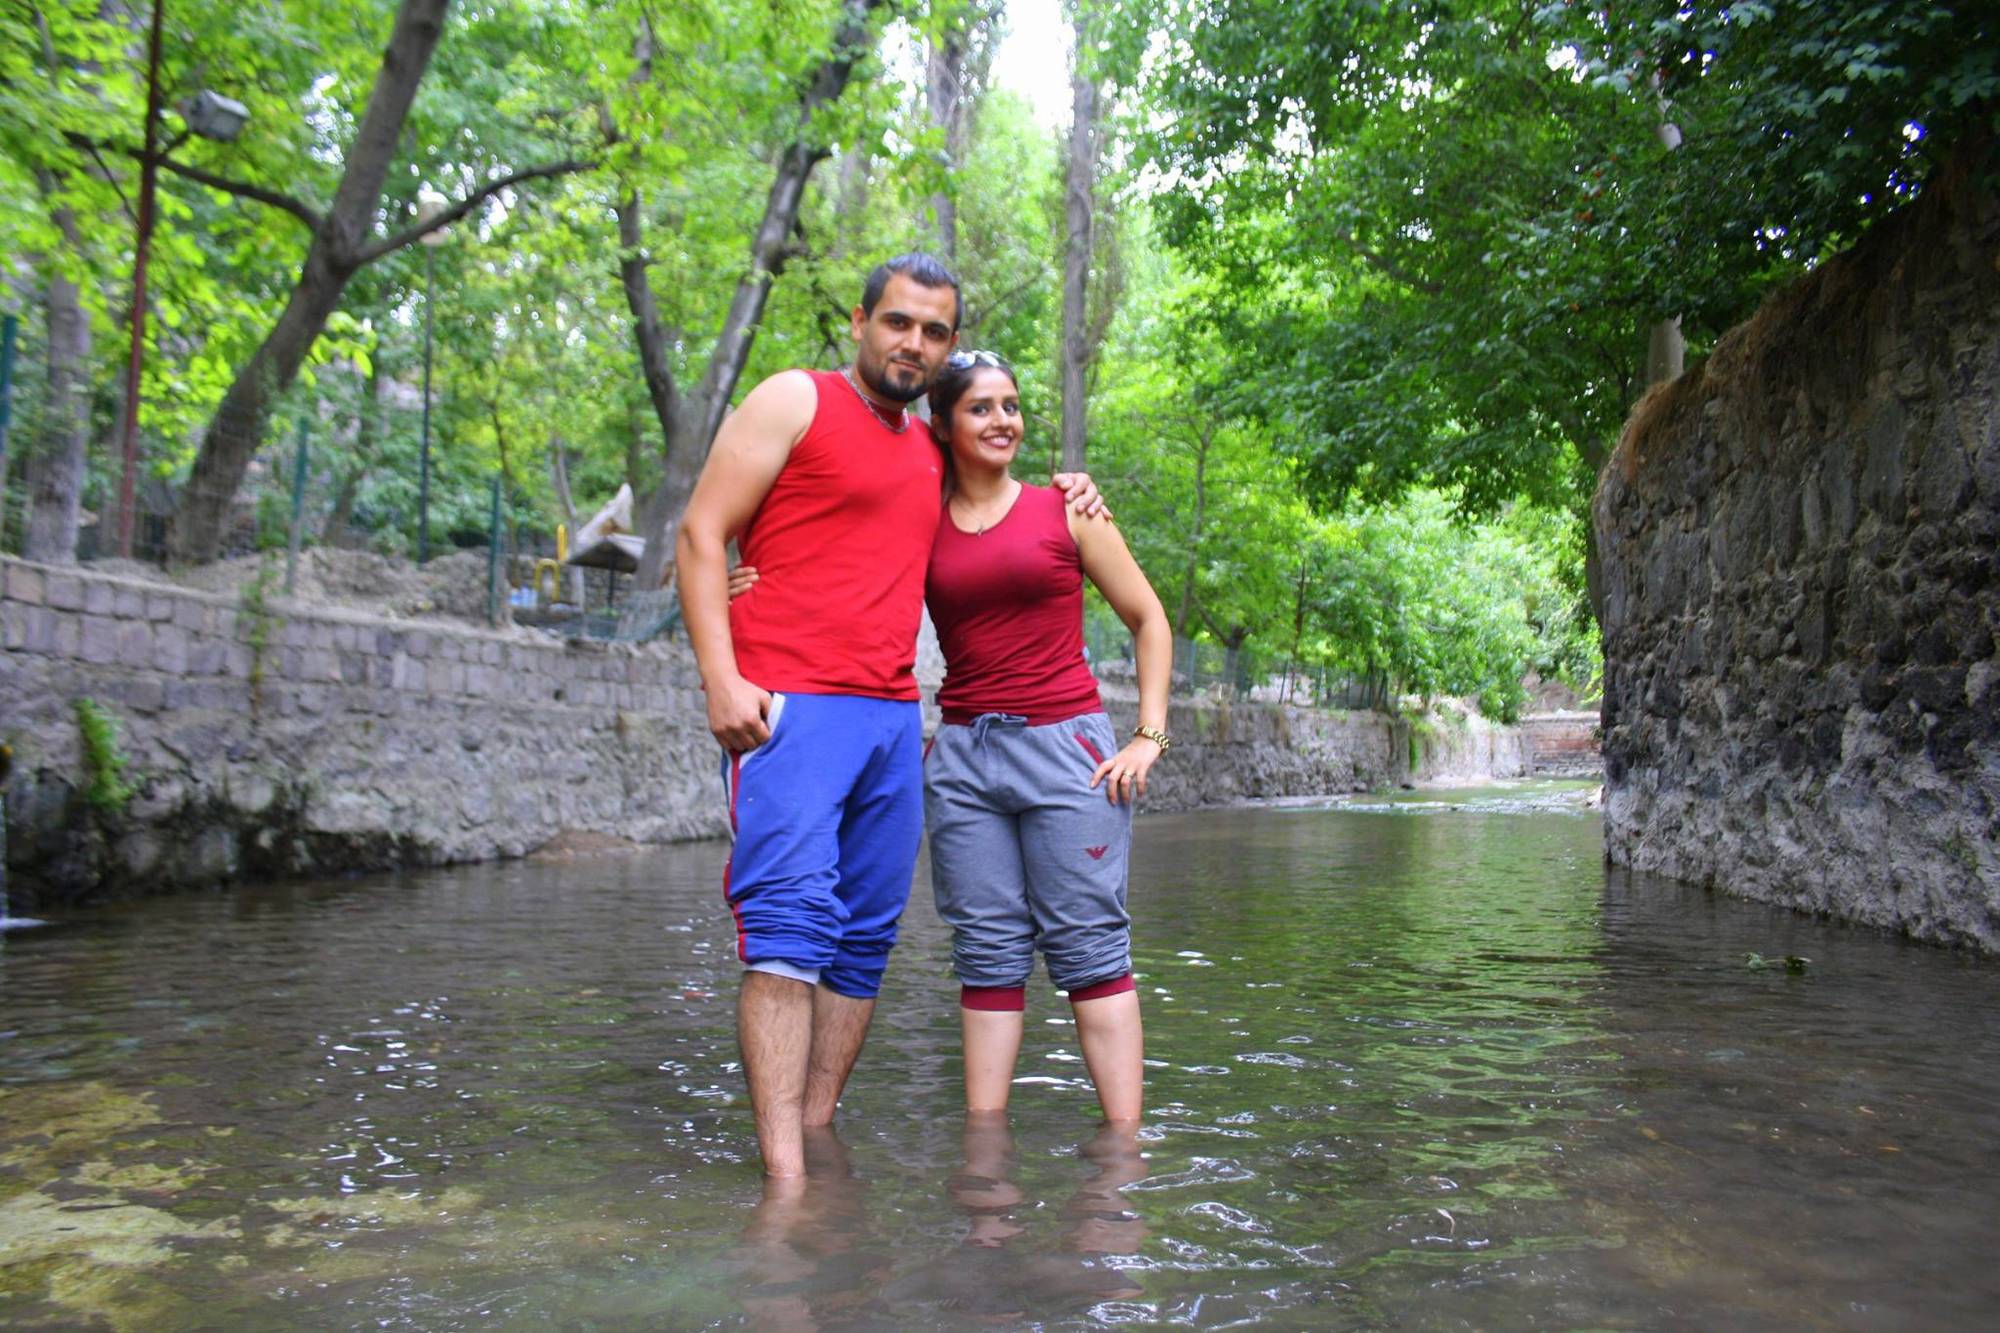 Photo session after the picnic in Nevsehir Park